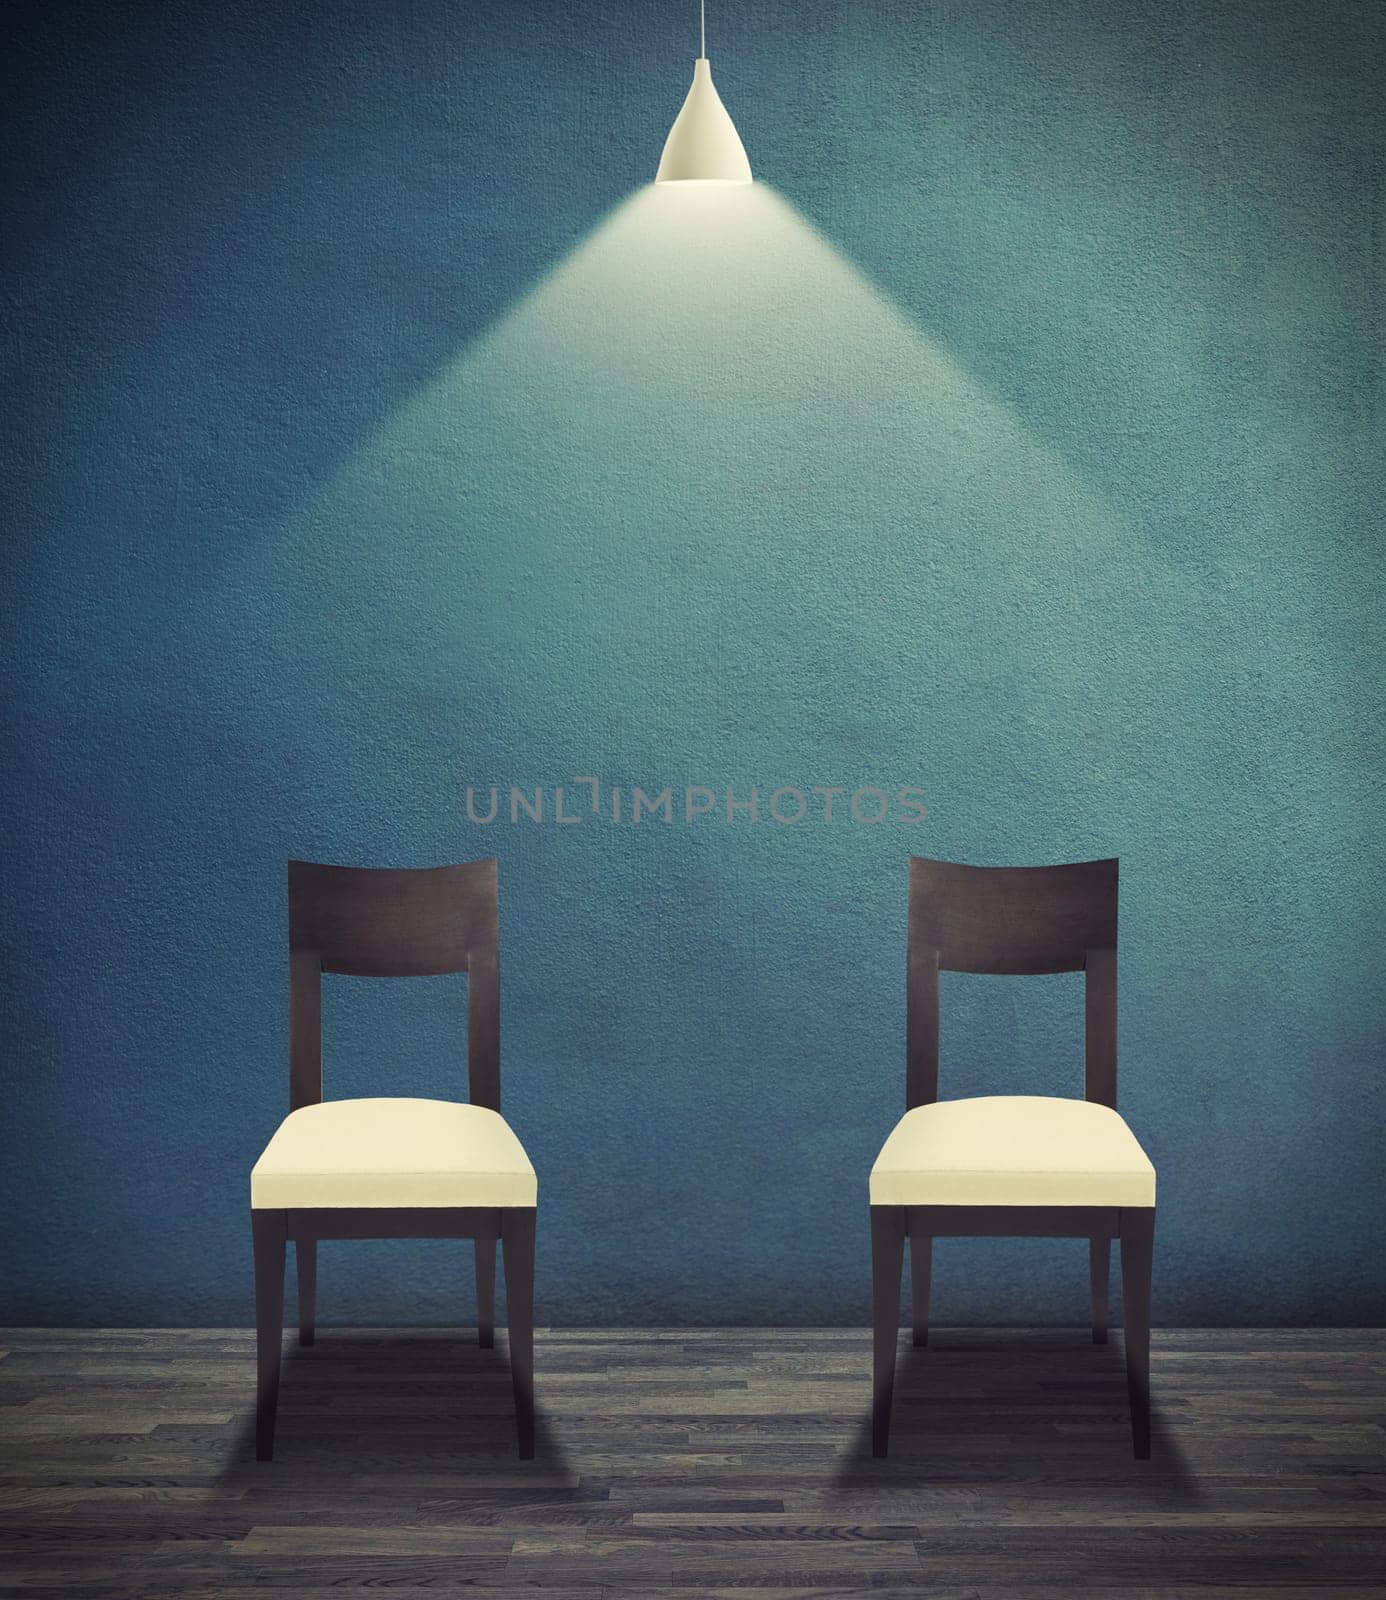 Illustration, empty room and interrogation with light on chair for legal, justice or questions on wall background. Jail, criminal investigation and spotlight art for suspect, defense or punishment.